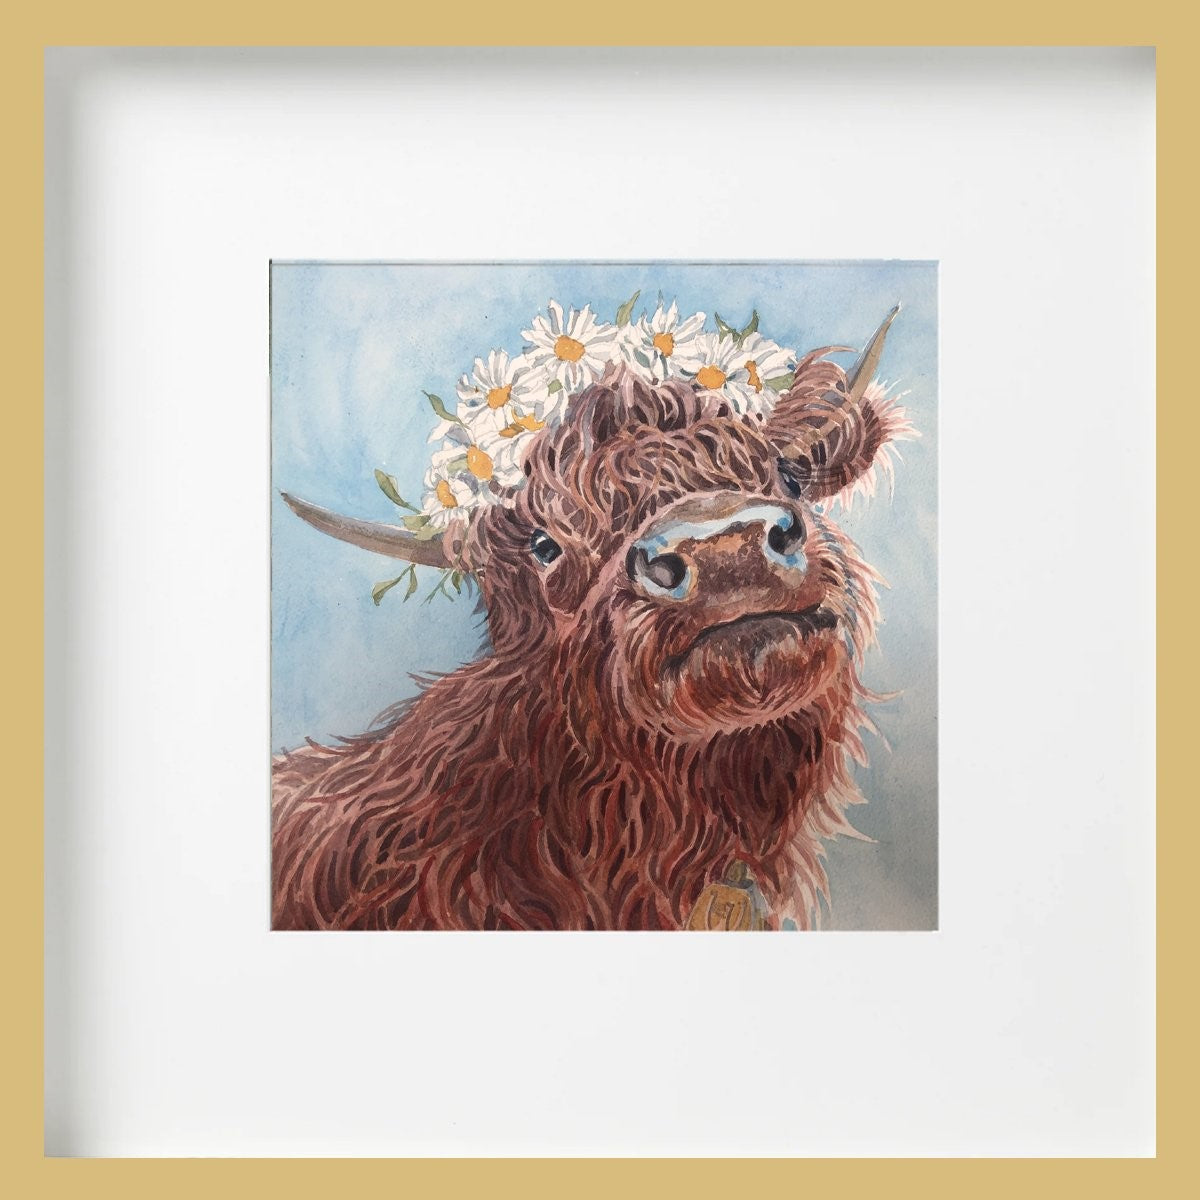 Topsy Farms' Willow the highland cow wearing a crown of daisies